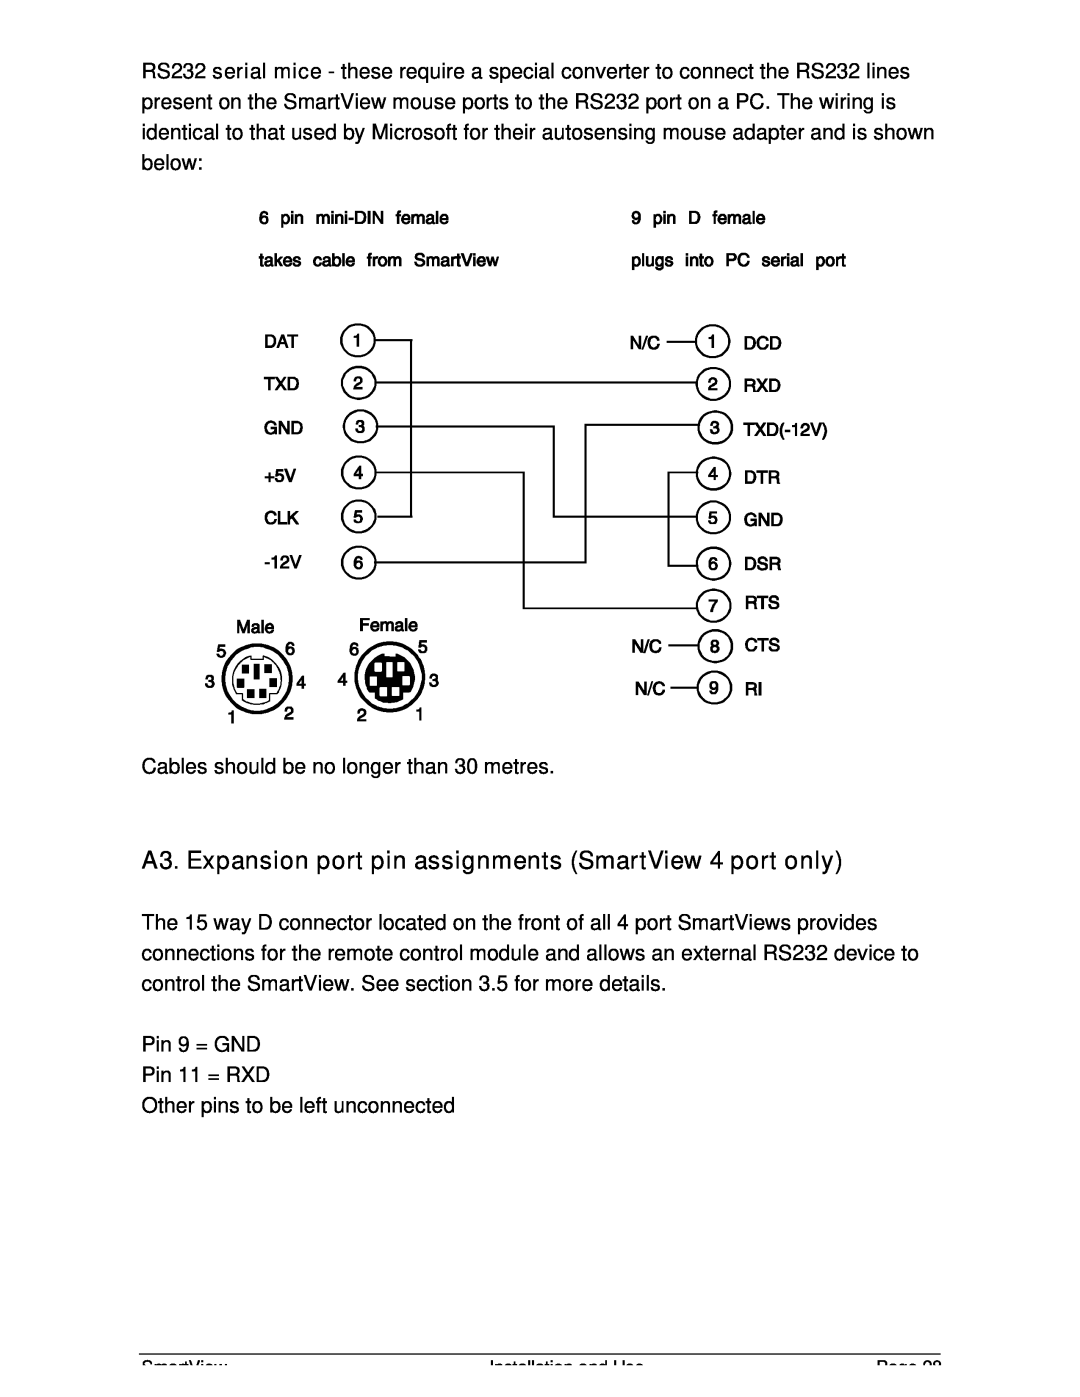 Adder Technology SV2, SV4 manual A3. Expansion port pin assignments SmartView 4 port only 